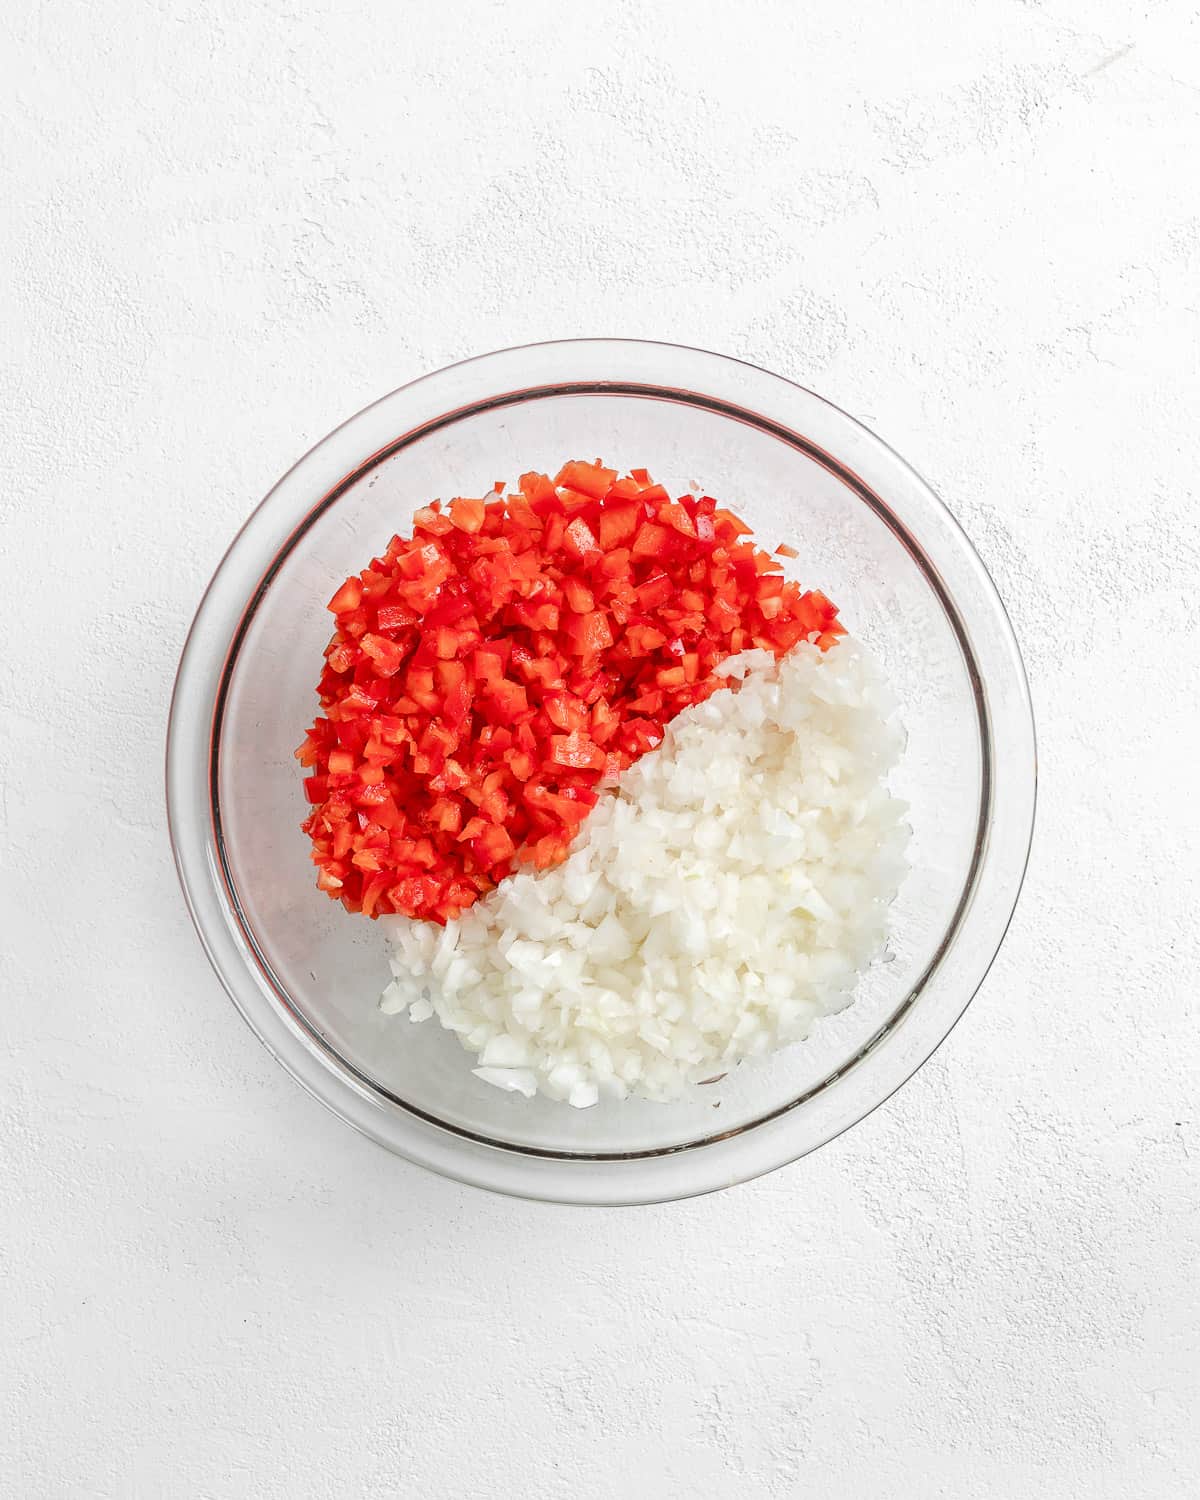 red pepper and onion minced in a glass bowl against a white surface